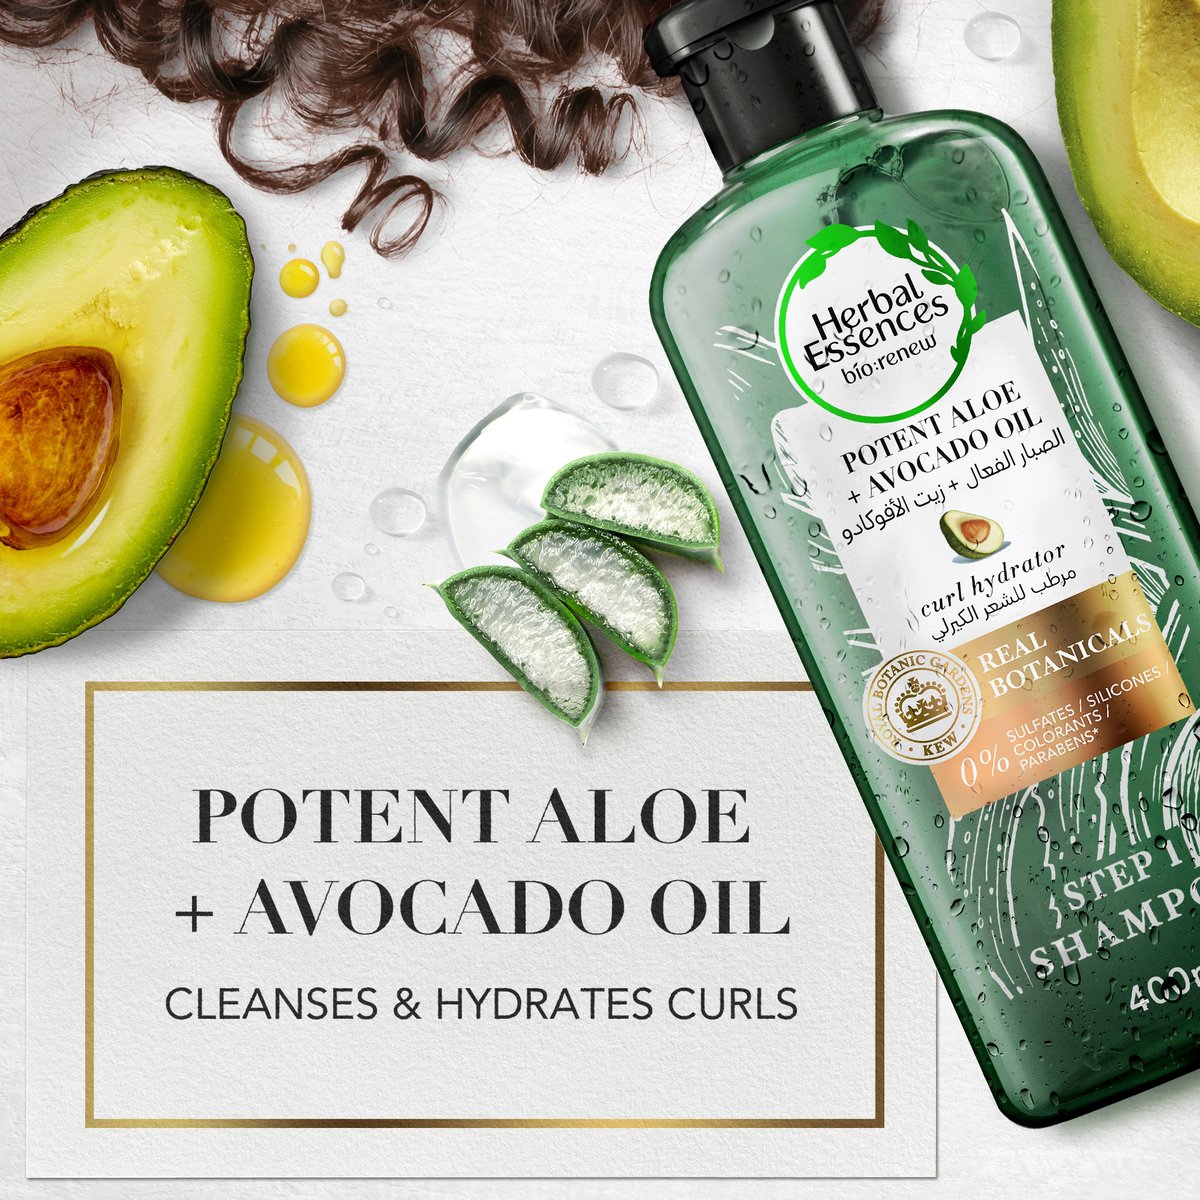 Herbal Essences Sulfate-Free Potent Aloe + Avocado Oil Hair Shampoo For Cleanse and Hydrate Curls, 400 ml